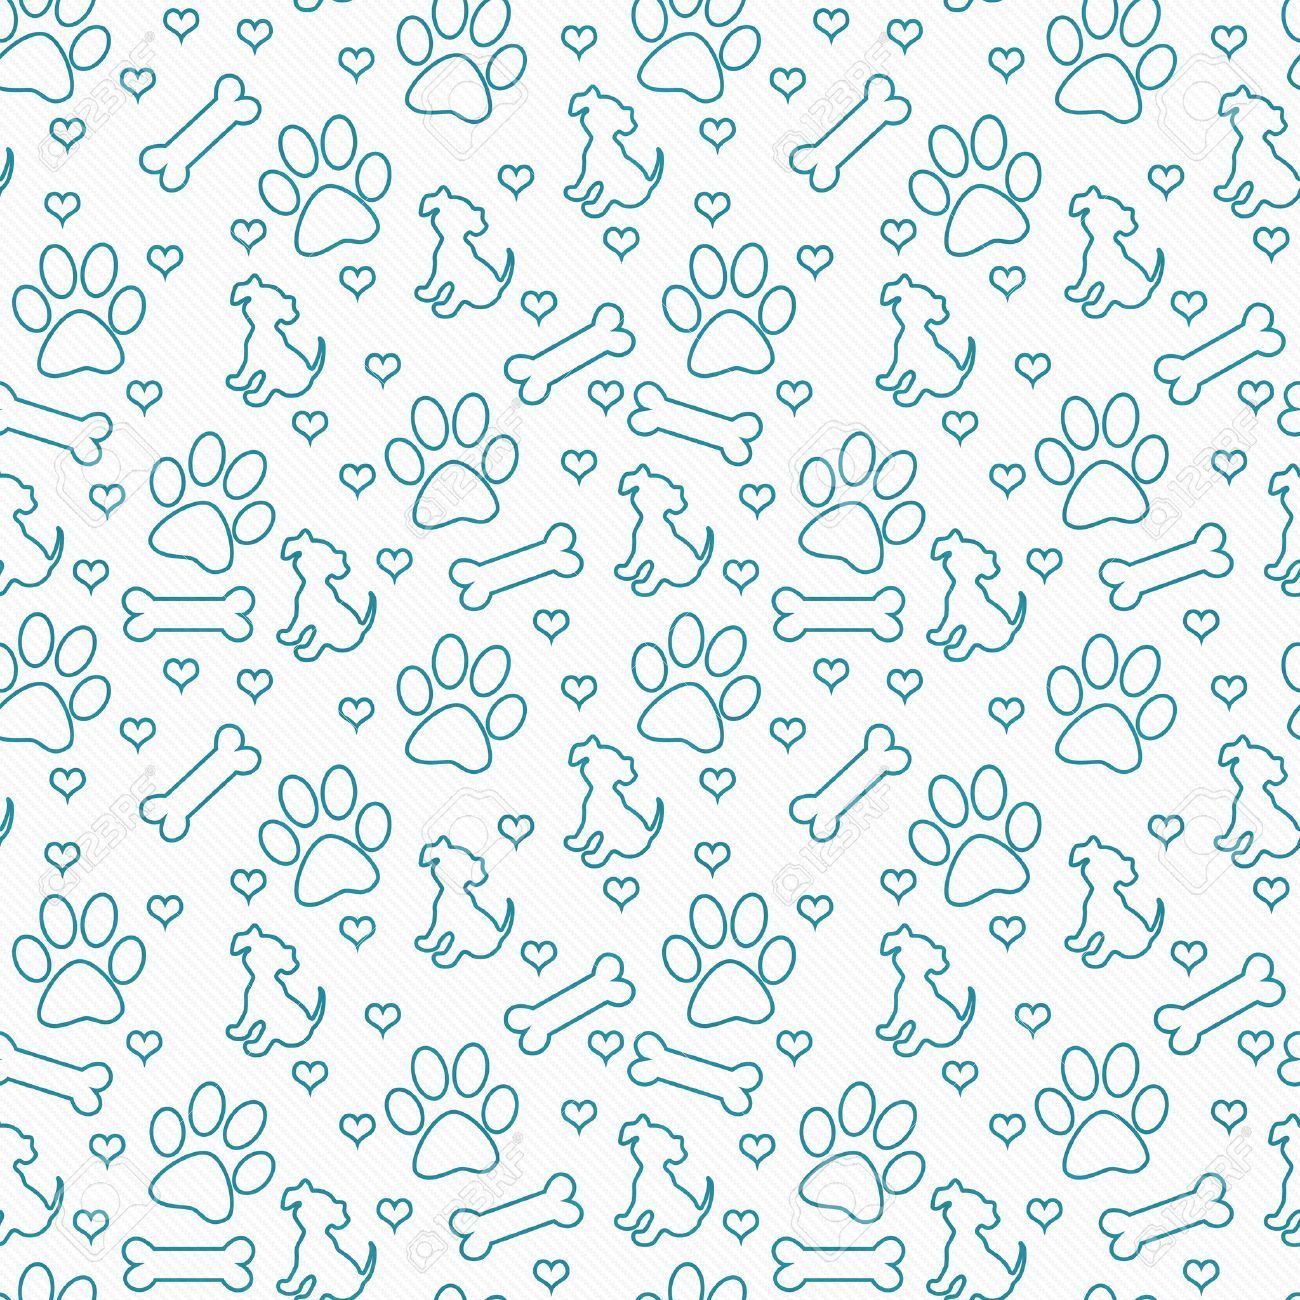 Teal And White Dog Paw Prints Puppy Bone And Hearts Tile Pattern. Paw print background, Paw wallpaper, Dog background